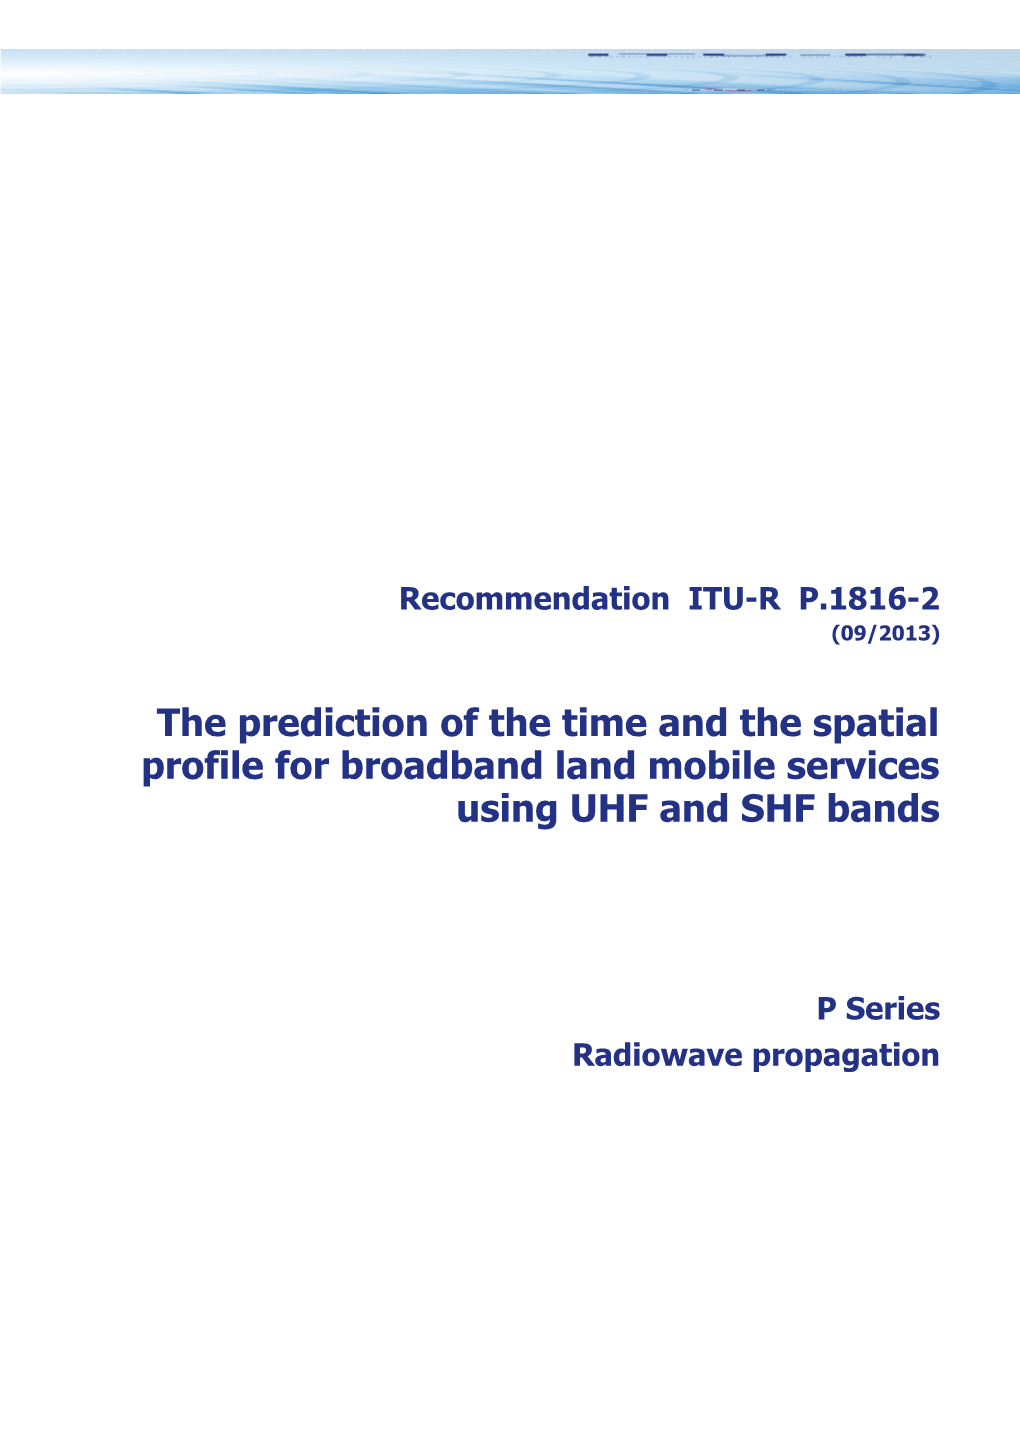 RECOMMENDATION ITU-R P.1816-2 - the Prediction of the Time and the Spatial Profile For